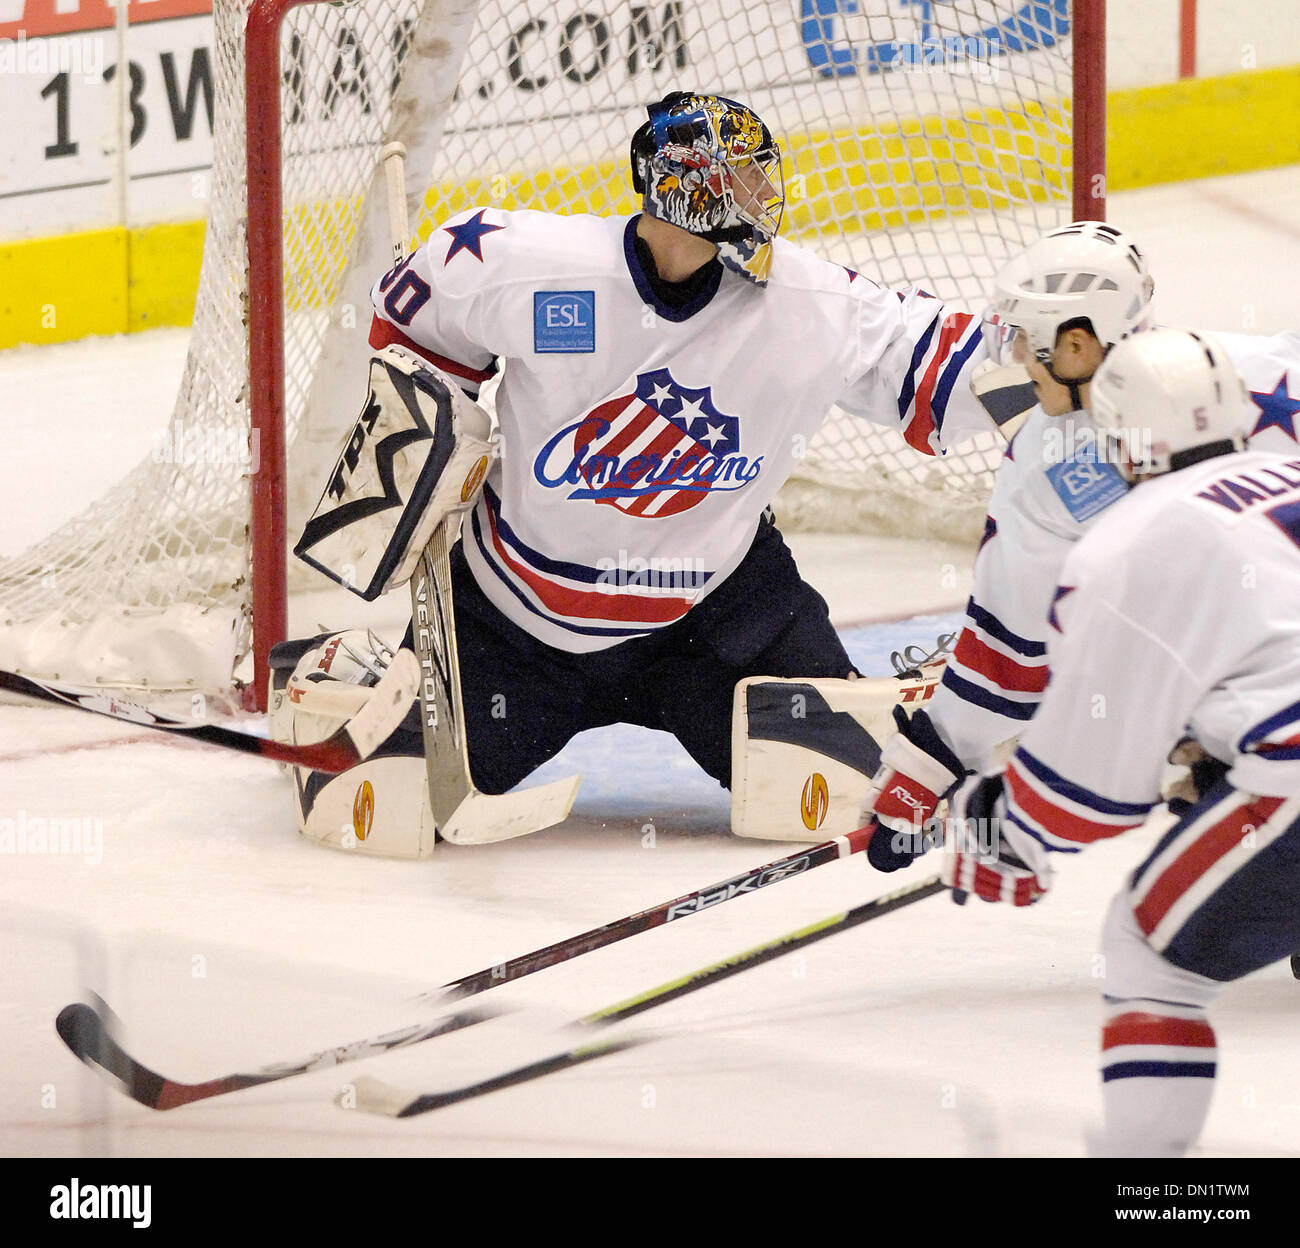 November 17, 2006: AHL - Rochester goaltender Craig Anderson #30 in action against Manitoba. The Manitoba Canucks at Rochester Americans at the Blue Cross Arena at the War Memorial Auditorium. Rochester defeated Manitoba 4 to 3 in OT.(Credit Image: © Alan Schwartz/Cal Sport Media) Stock Photo